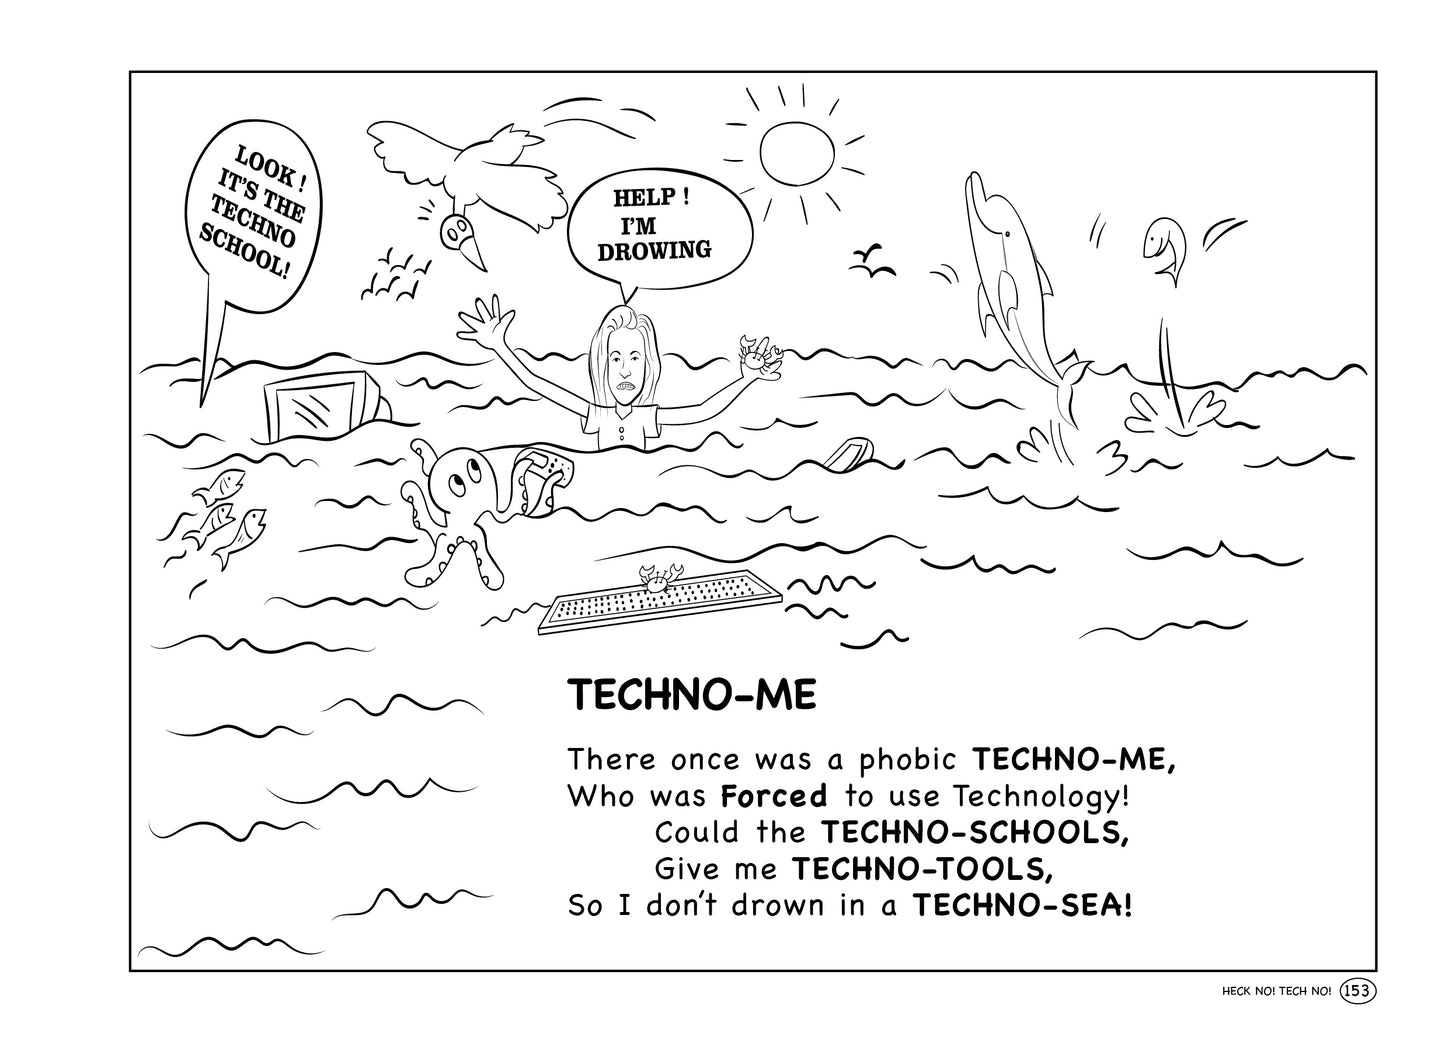 HECK NO! TECH NO! A Humorous Glimpse at the Madness of Technology! - 2nd Edition (Paperback)